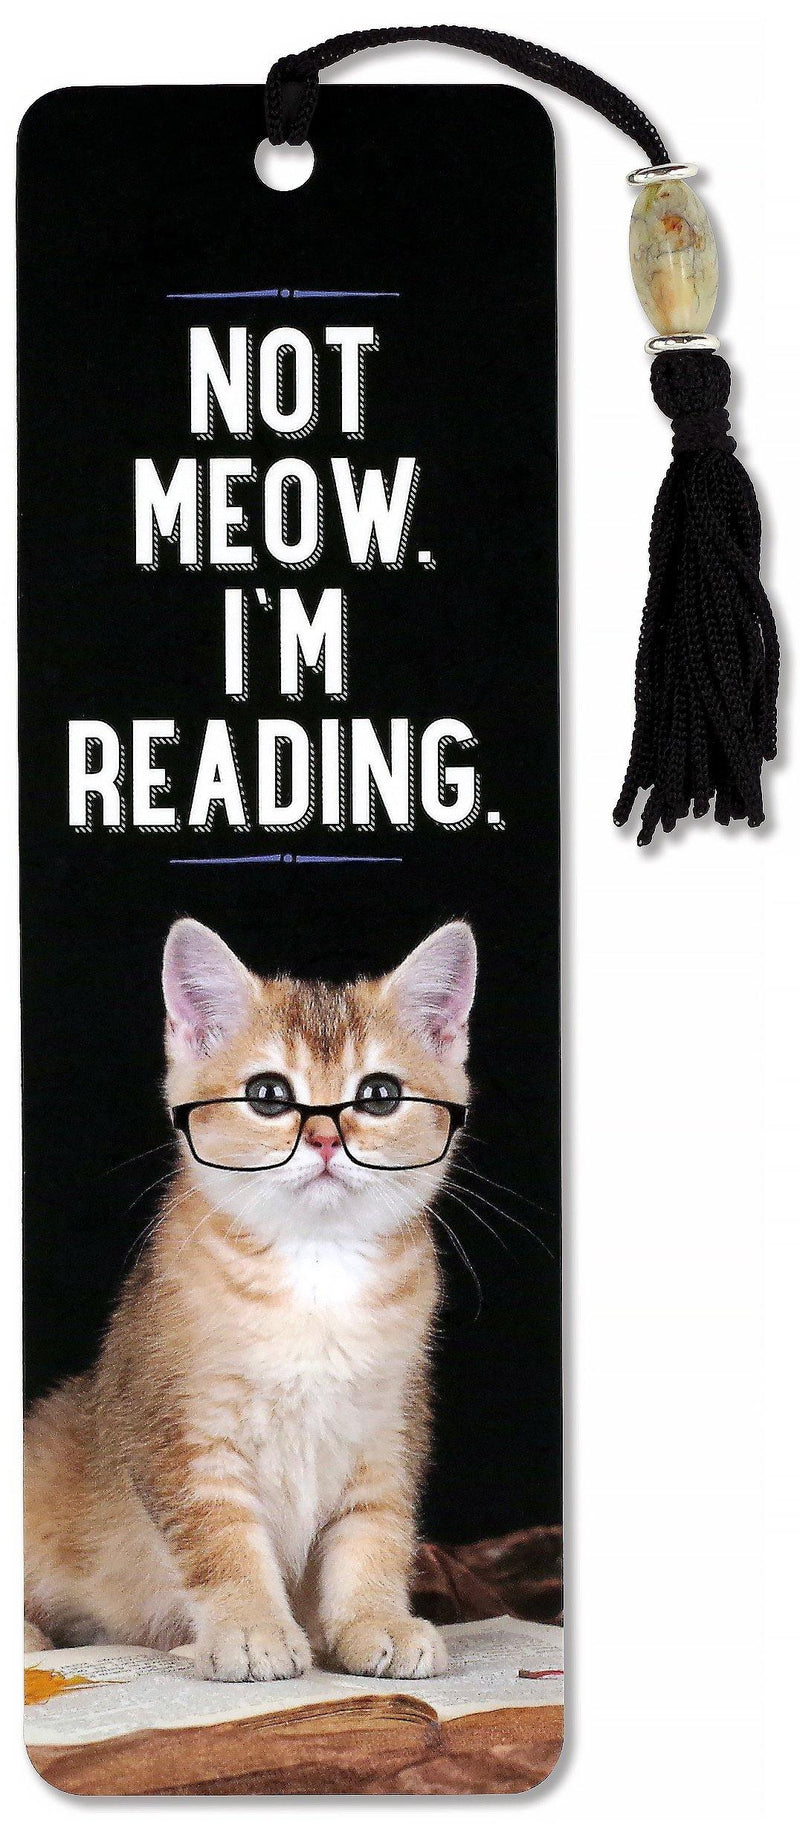 Beaded Bookmark: Not Meow, I'm Reading - SpectrumStore SG